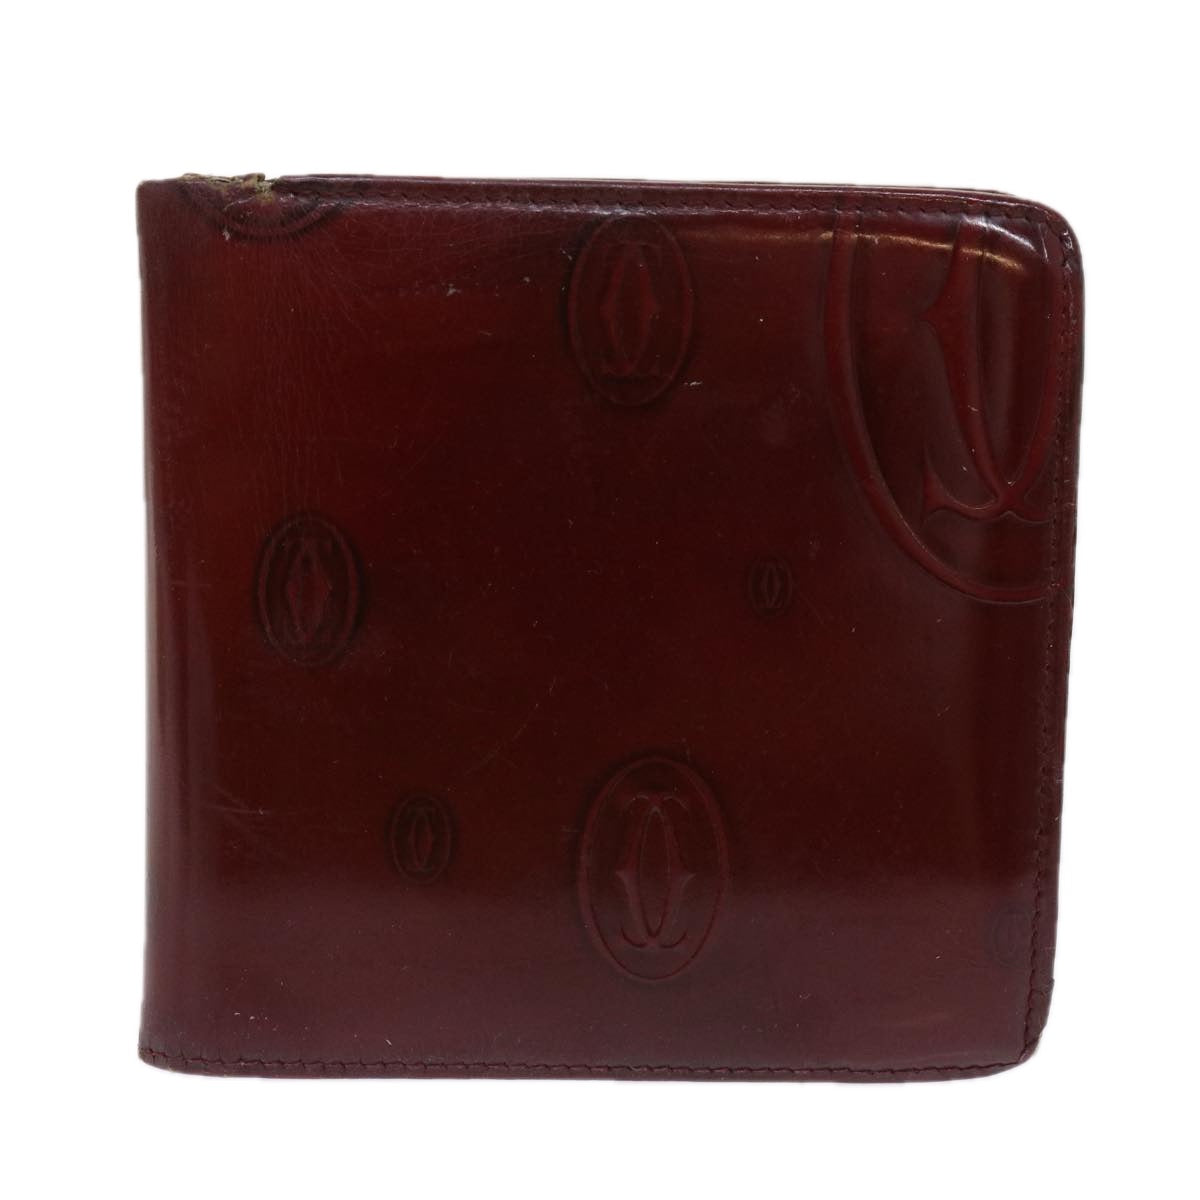 CARTIER Wallet Leather 6Set Wine Red Black Auth ar11264 - 0